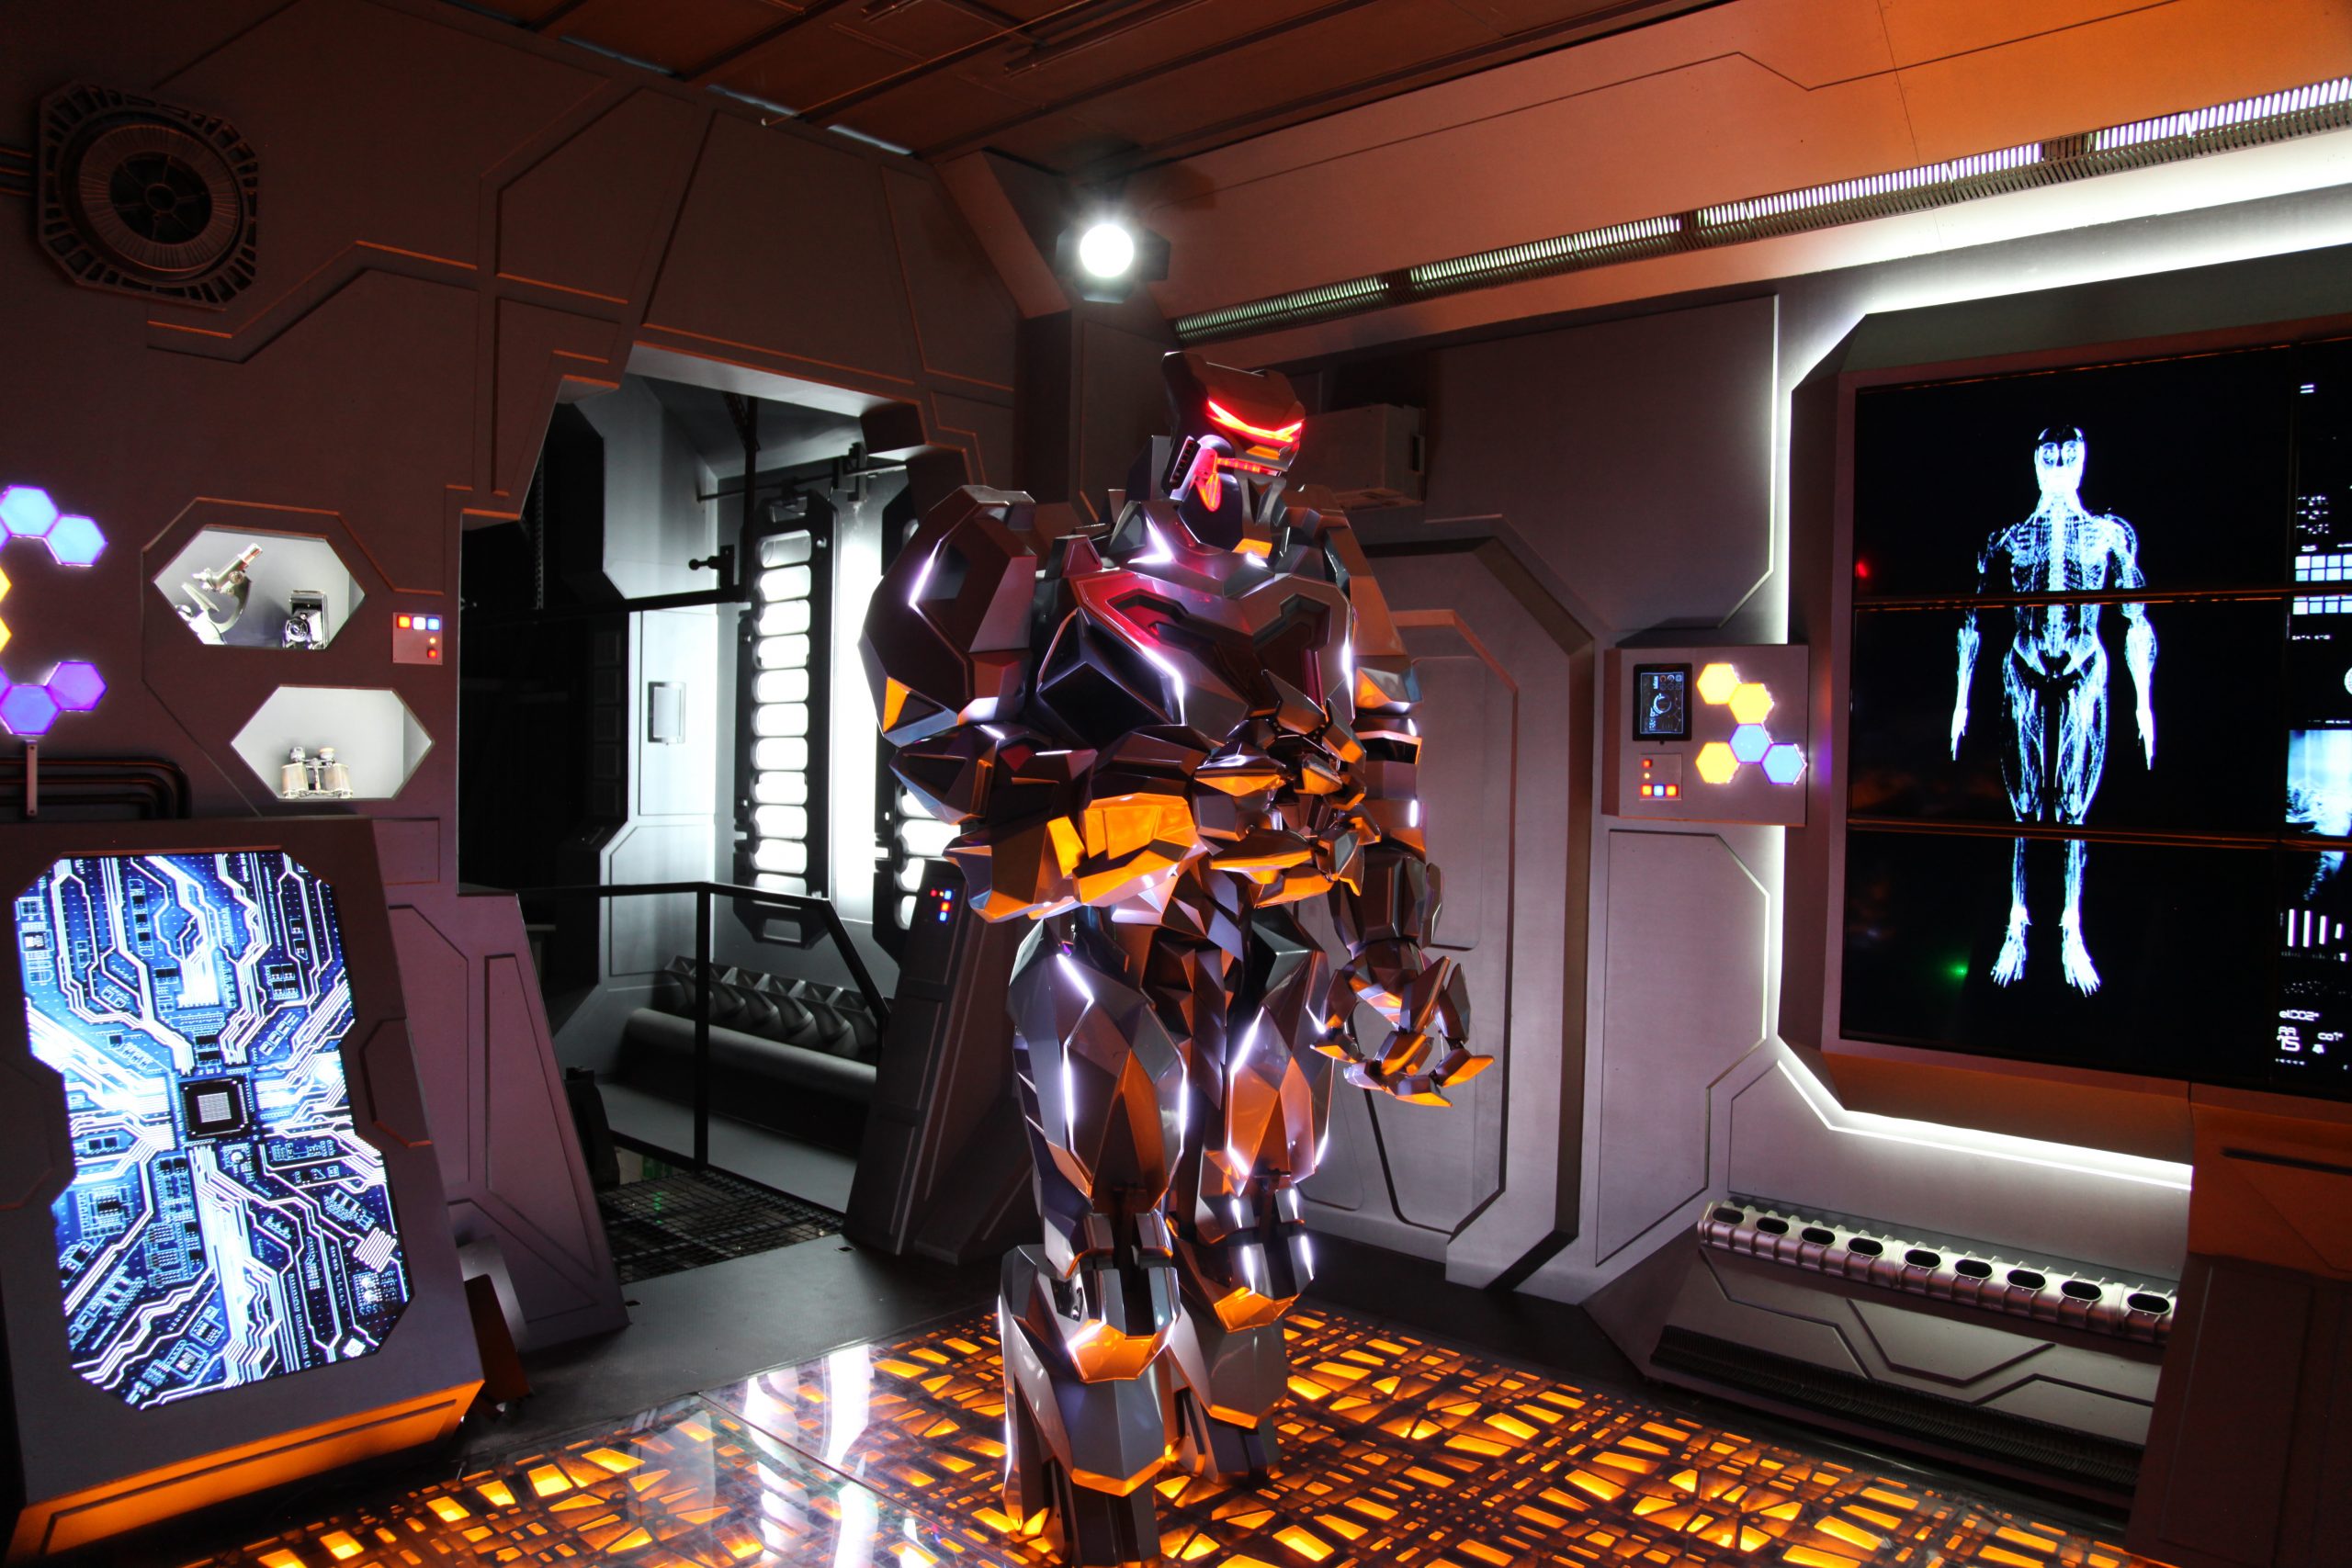 Brutus the Robot in the Cyberstein Spaceship